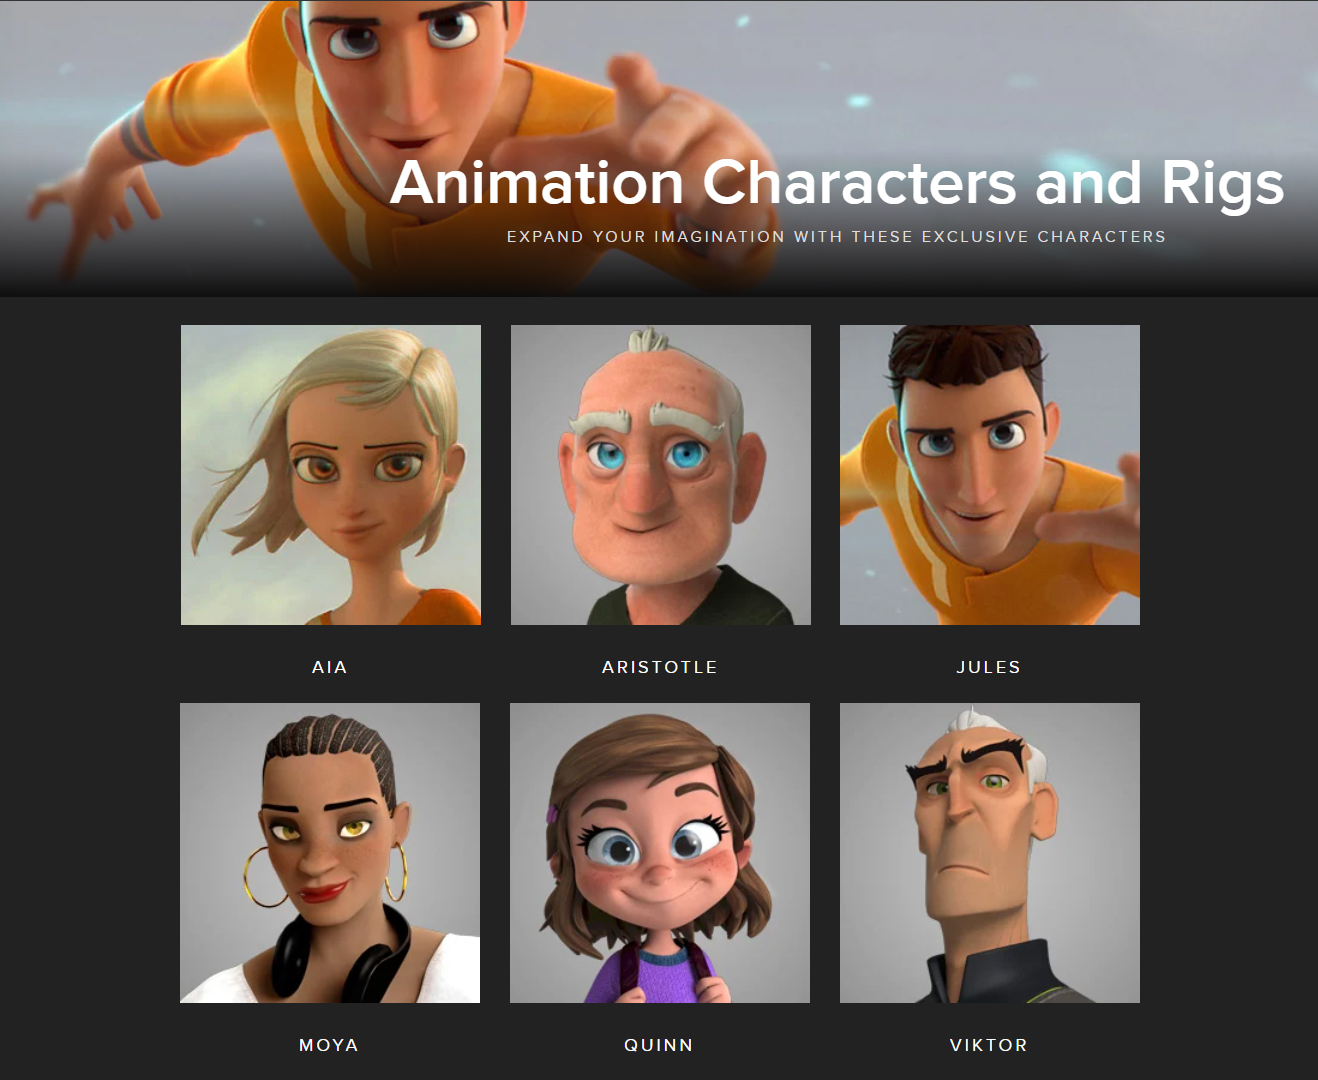 How to Evaluate Animation Work: Tips and Criteria